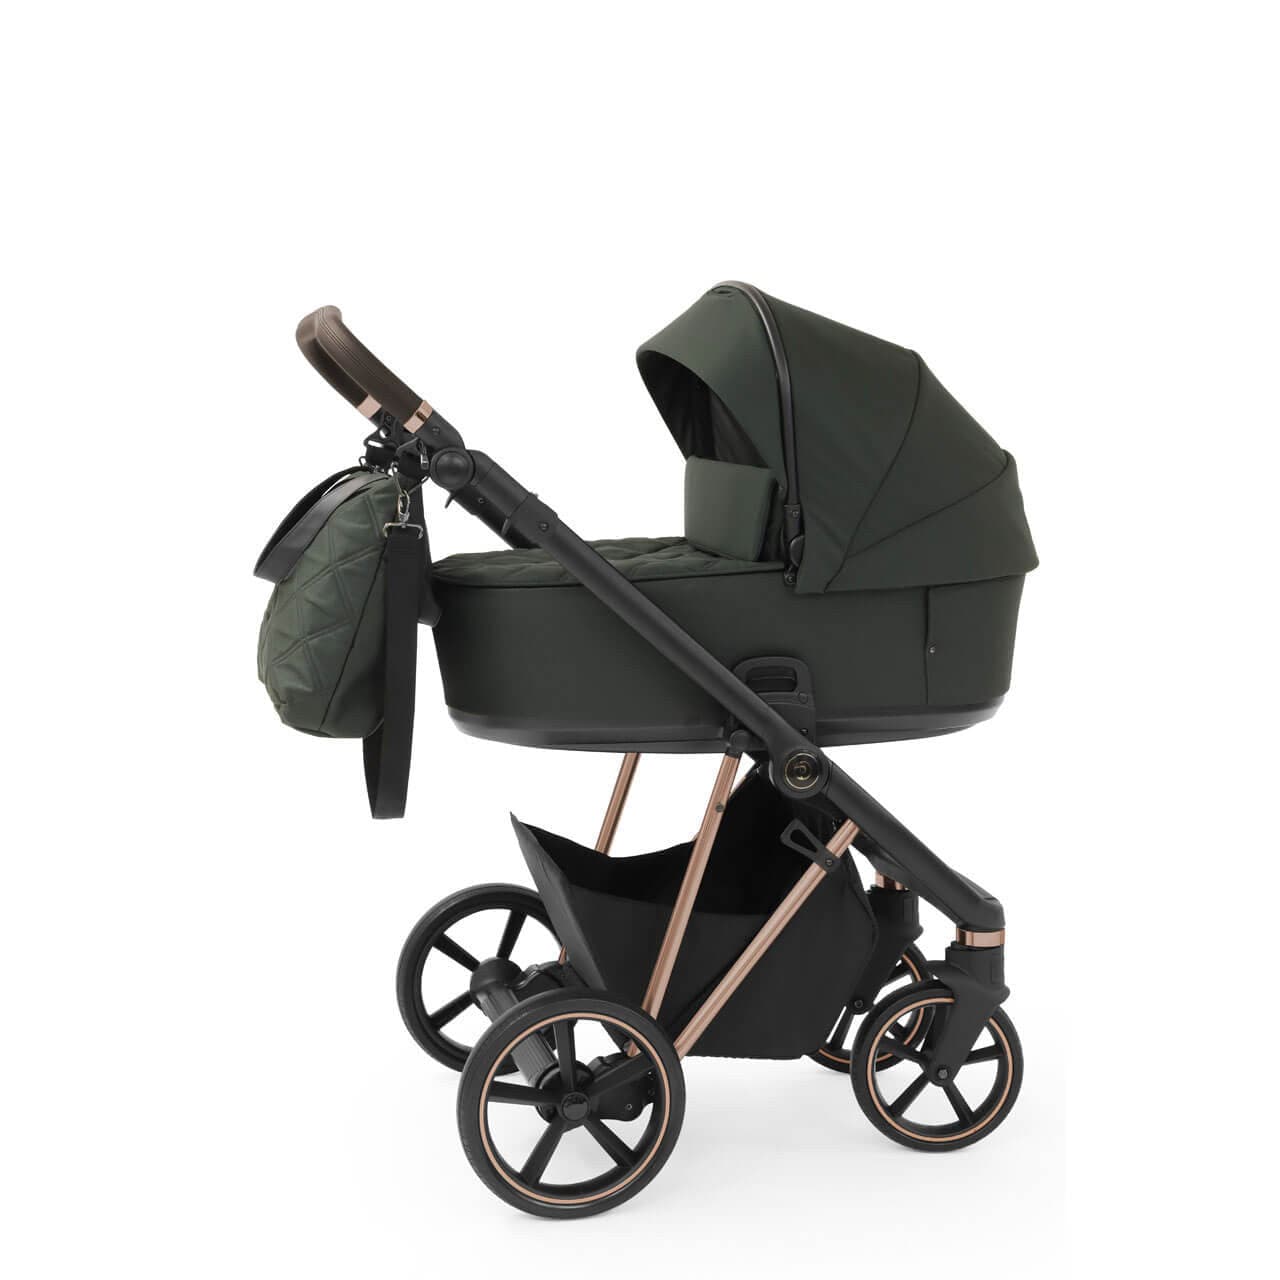 Babystyle Prestige Vogue 8 Piece Travel System Bundle - Spruce - Copper | For Your Little One